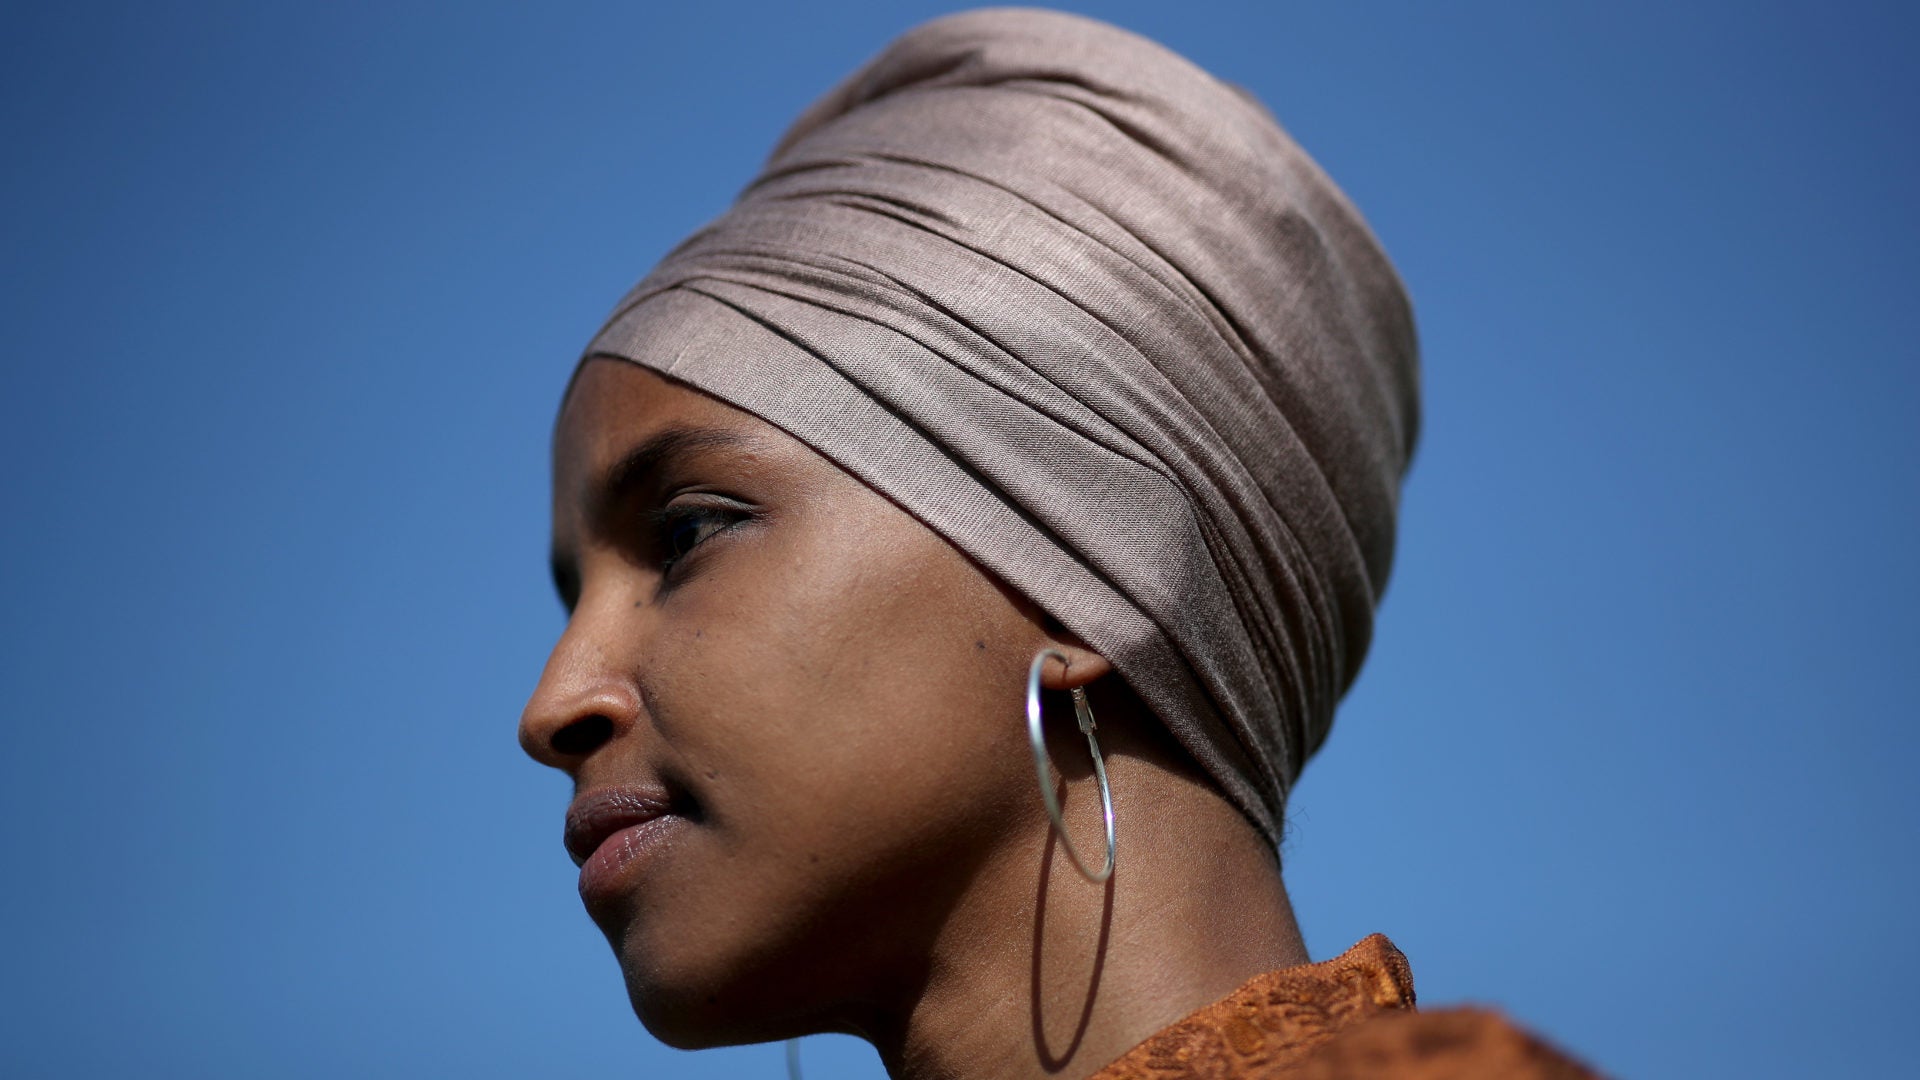 Man Pleads Guilty To Threatening To Kill Rep. Ilhan Omar